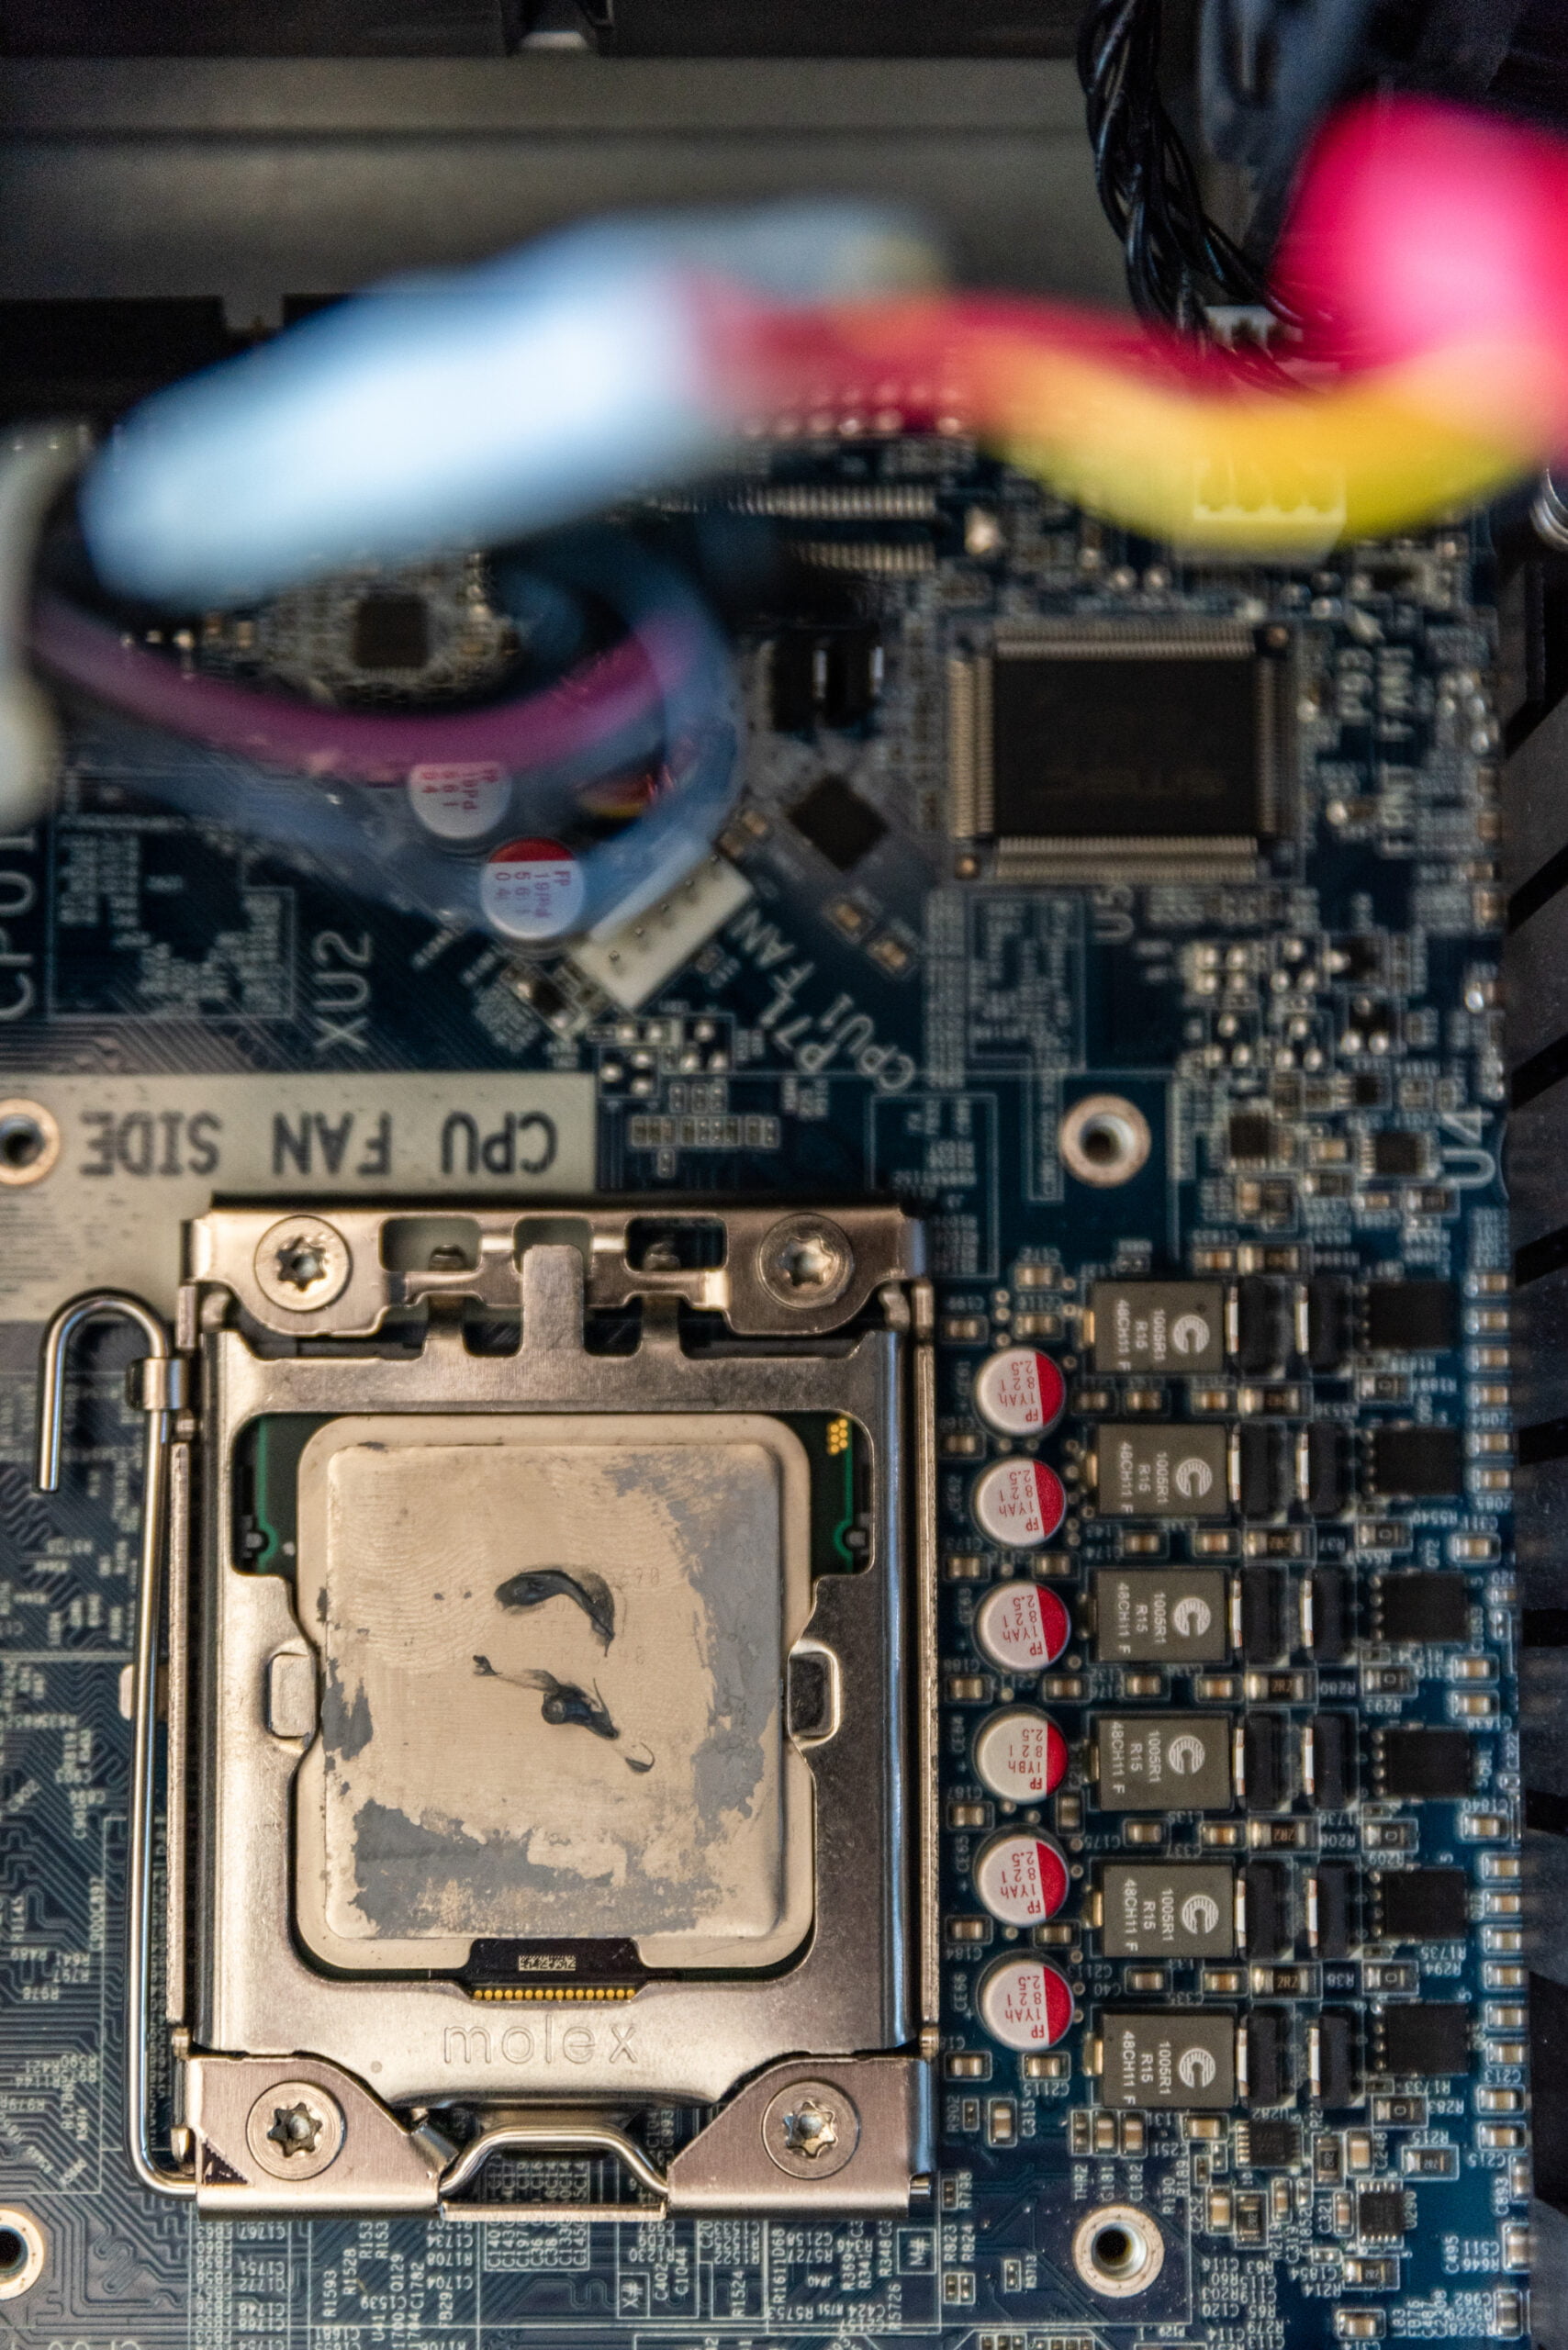 Applying thermal on the CPU slots